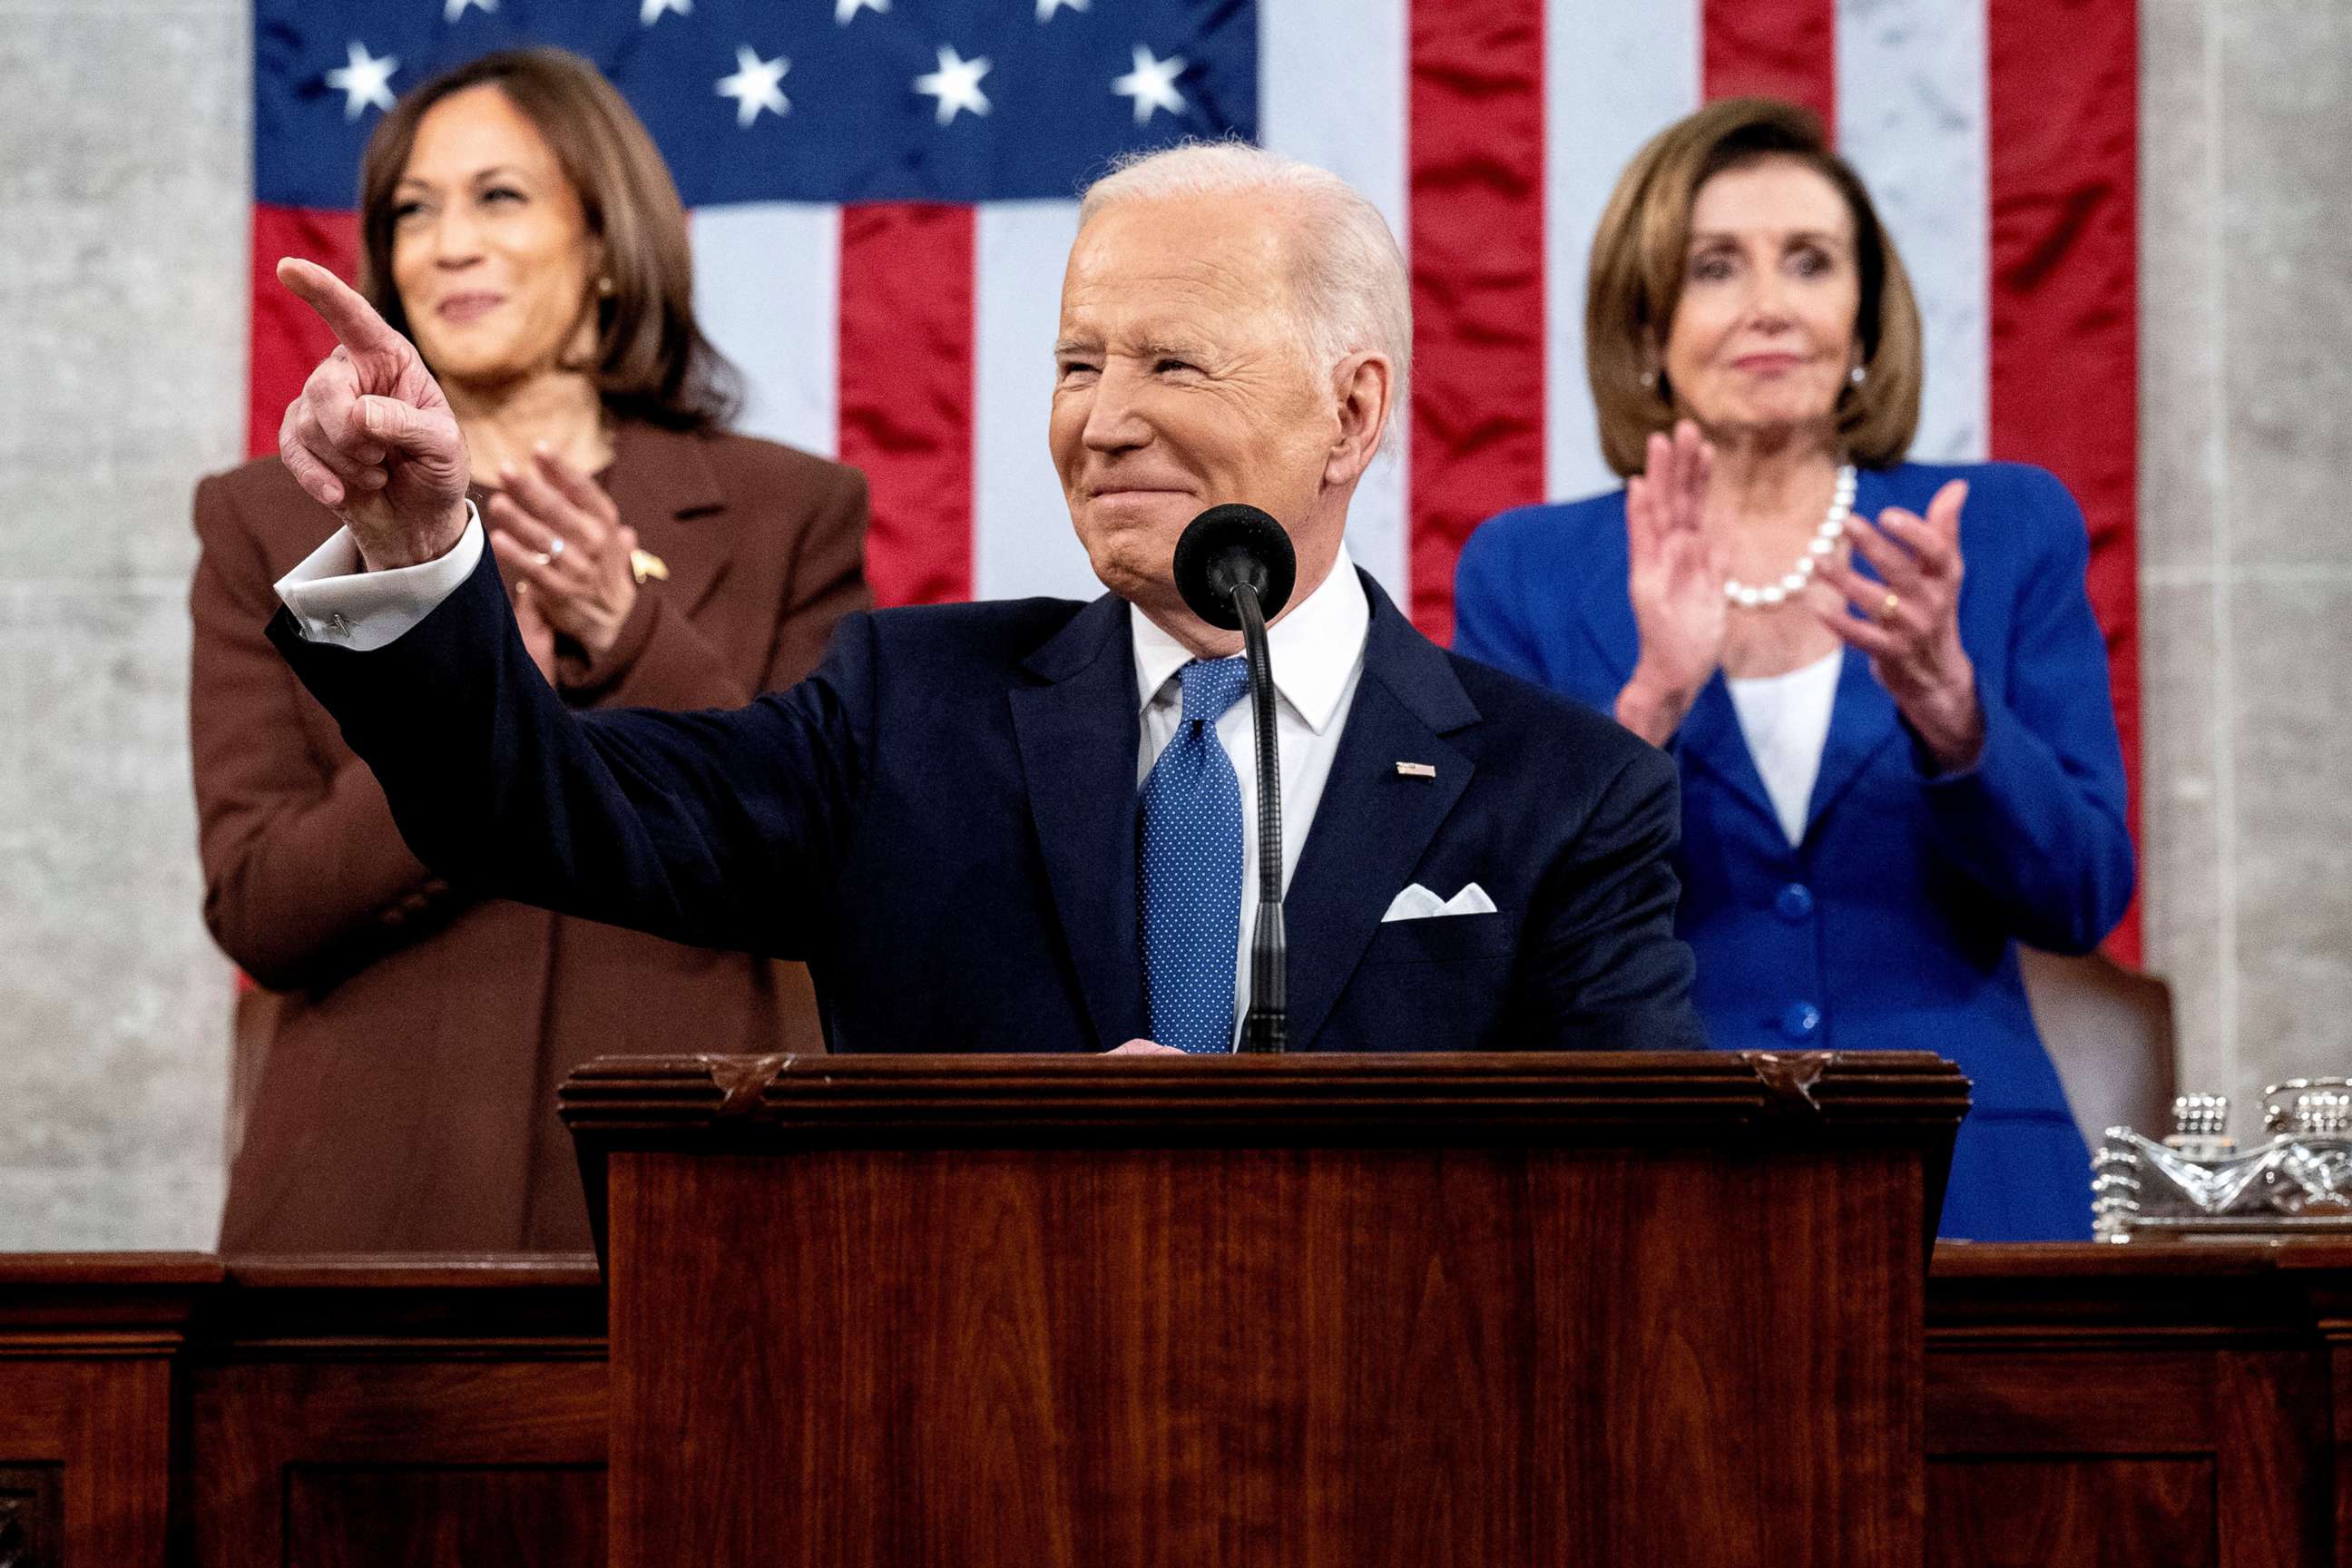 PHOTO: President Joe Biden delivers the State of the Union address at the U.S. Capitol in Washington, March 1, 2022.